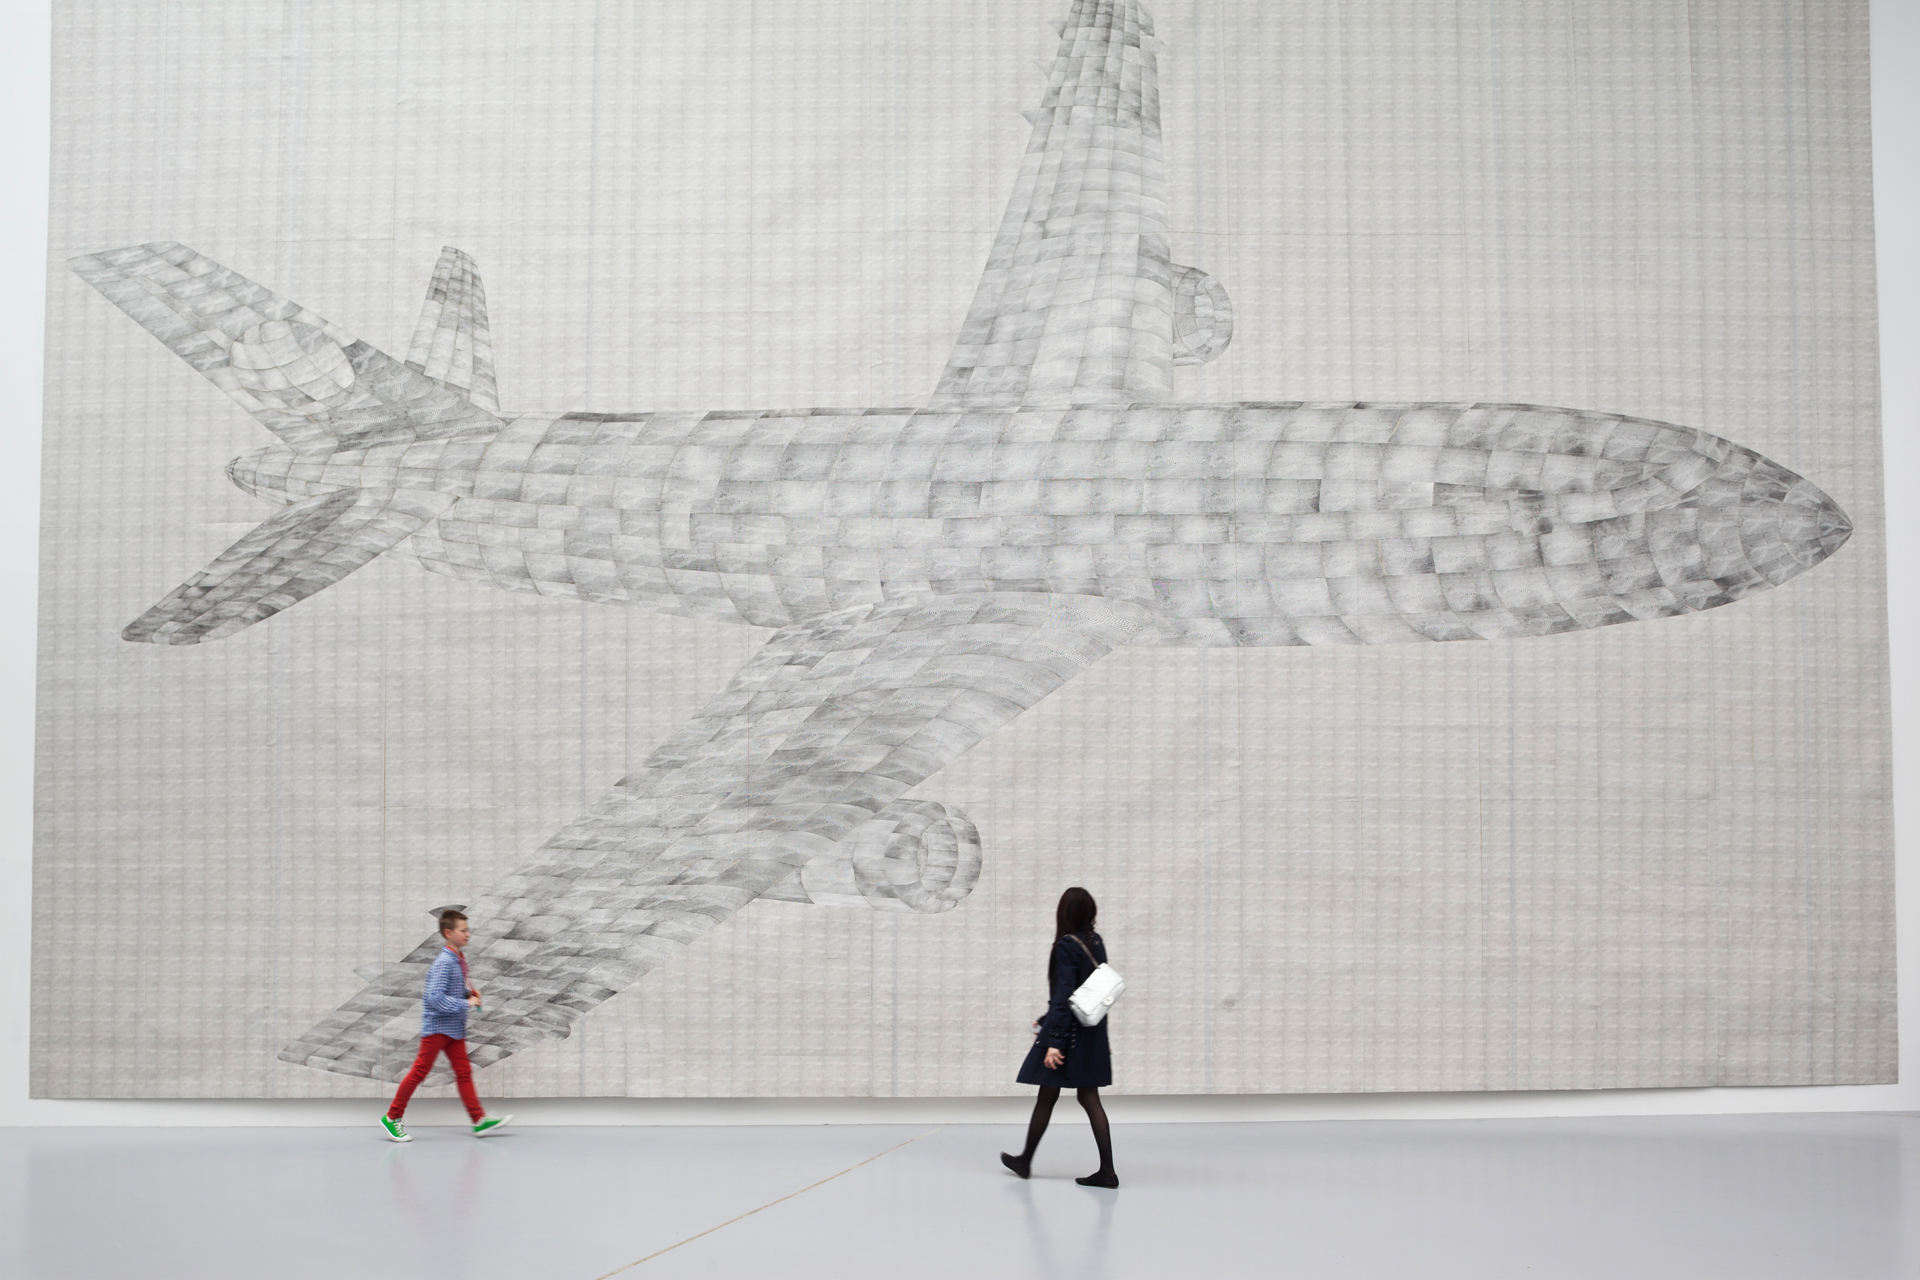  German artist Thomas Bayrle’s work is amongst the most impressive at dOCUMENTA(13). His huge collage made of thousand of photos depicts an airplane, but is surrounded by technical apparatuses such as car engines or windshield wipers in constant moti